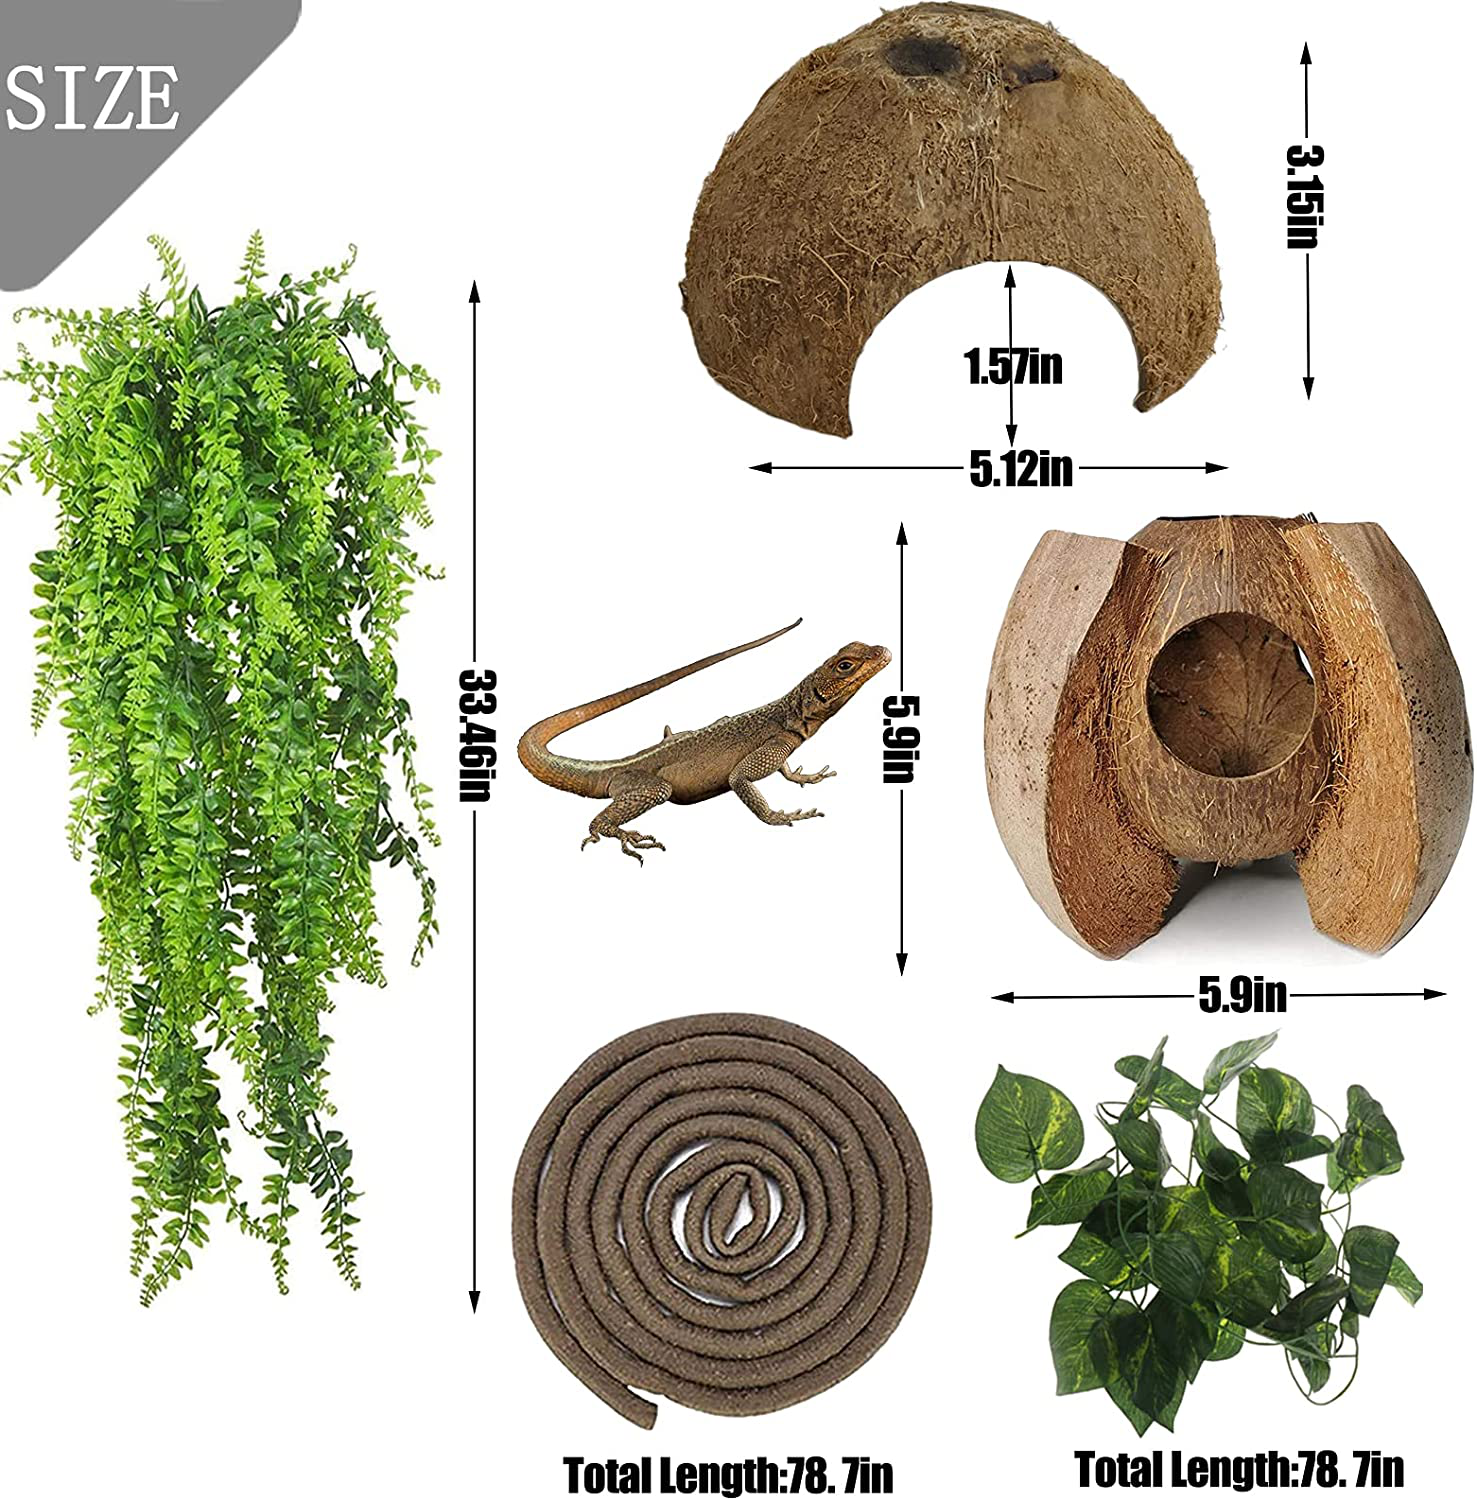 Hamiledyi Reptile Coconut Shell Hideout 5 Pack Lizard Coco Hut Durable Cave Habitat Jungle Climber Vines Flexible Plants Gecko Tank Accessories Decor for Chameleons Spiders Snakes Climbing Toys